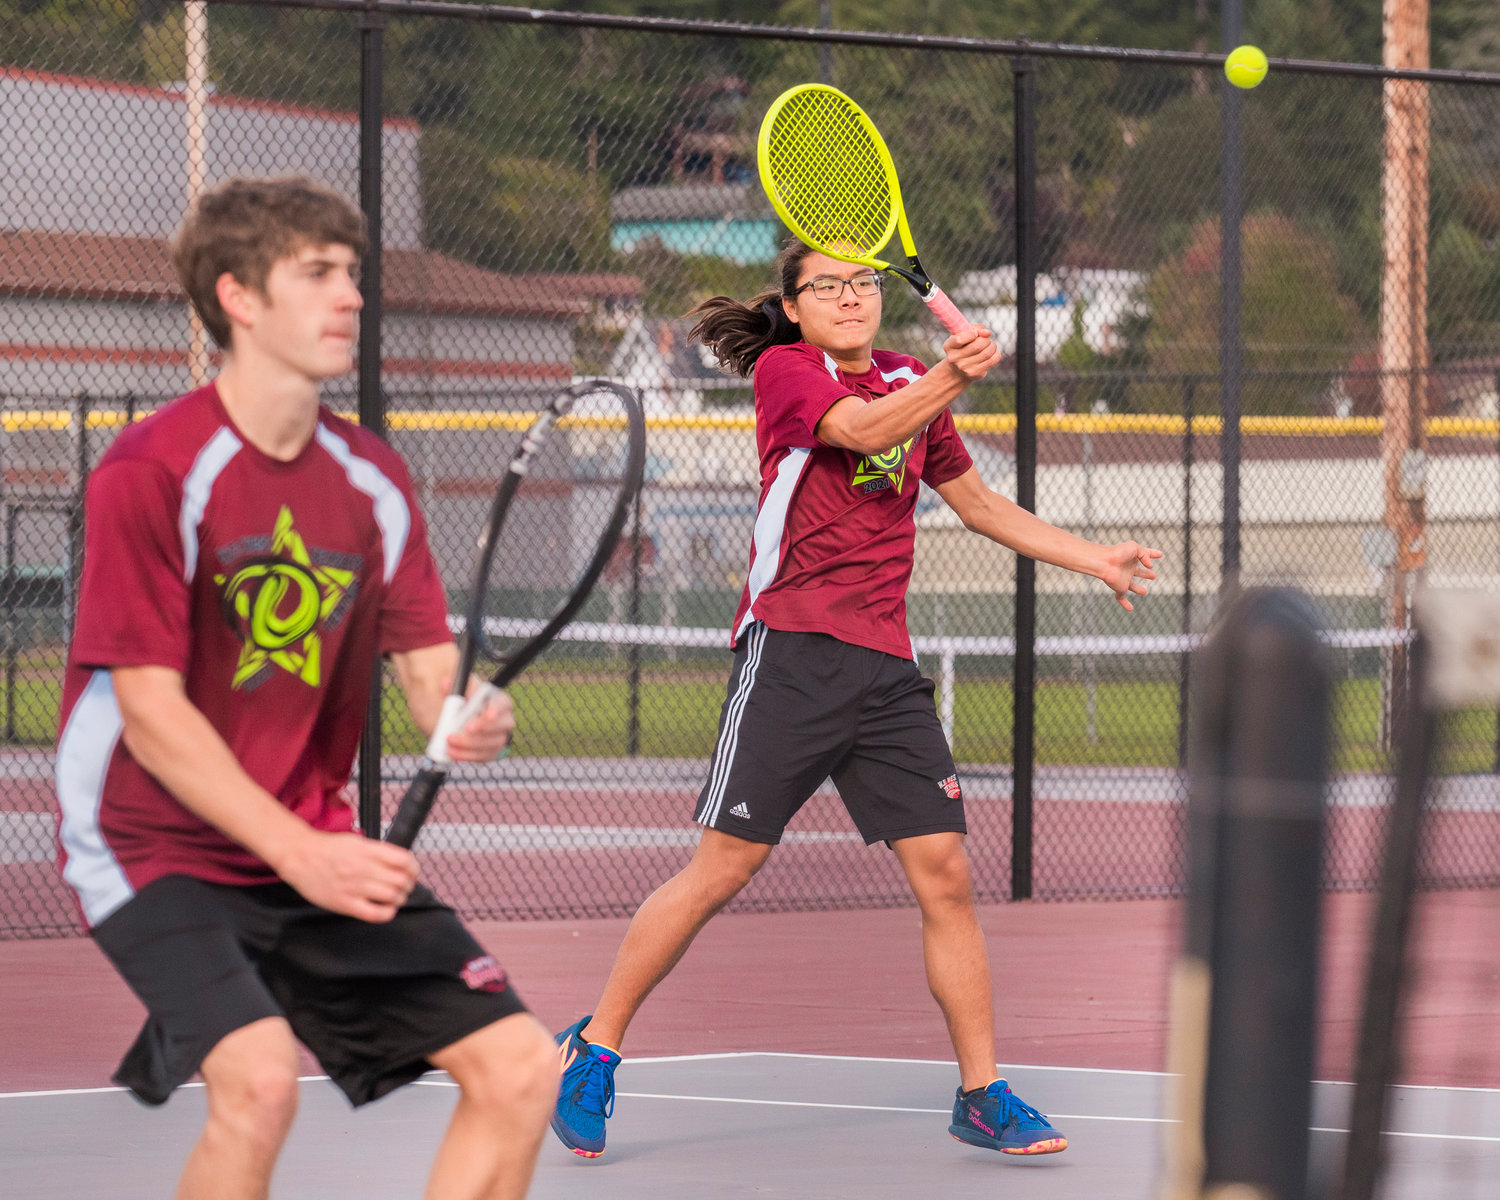 FILE PHOTO -- W.F. West’s Joseph Chung returns a ball during a doubles match with Aaron Boggess in Chehalis earlier this season.